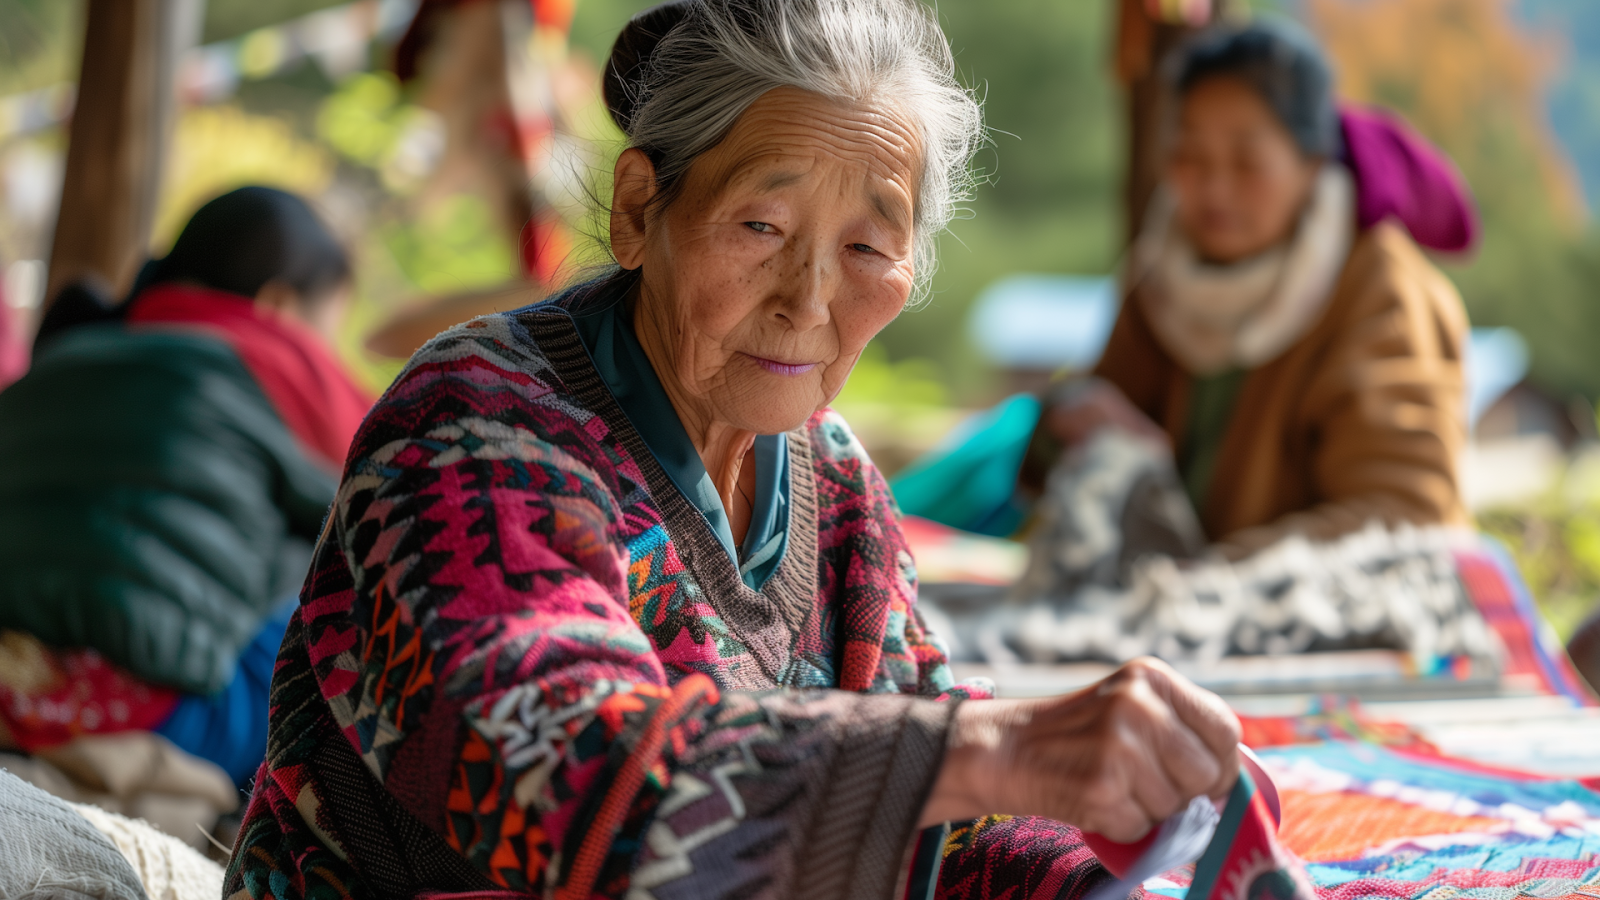 Bhutanese artisans weave traditional textiles outdoors, framed by the vivid Himalayan landscape.